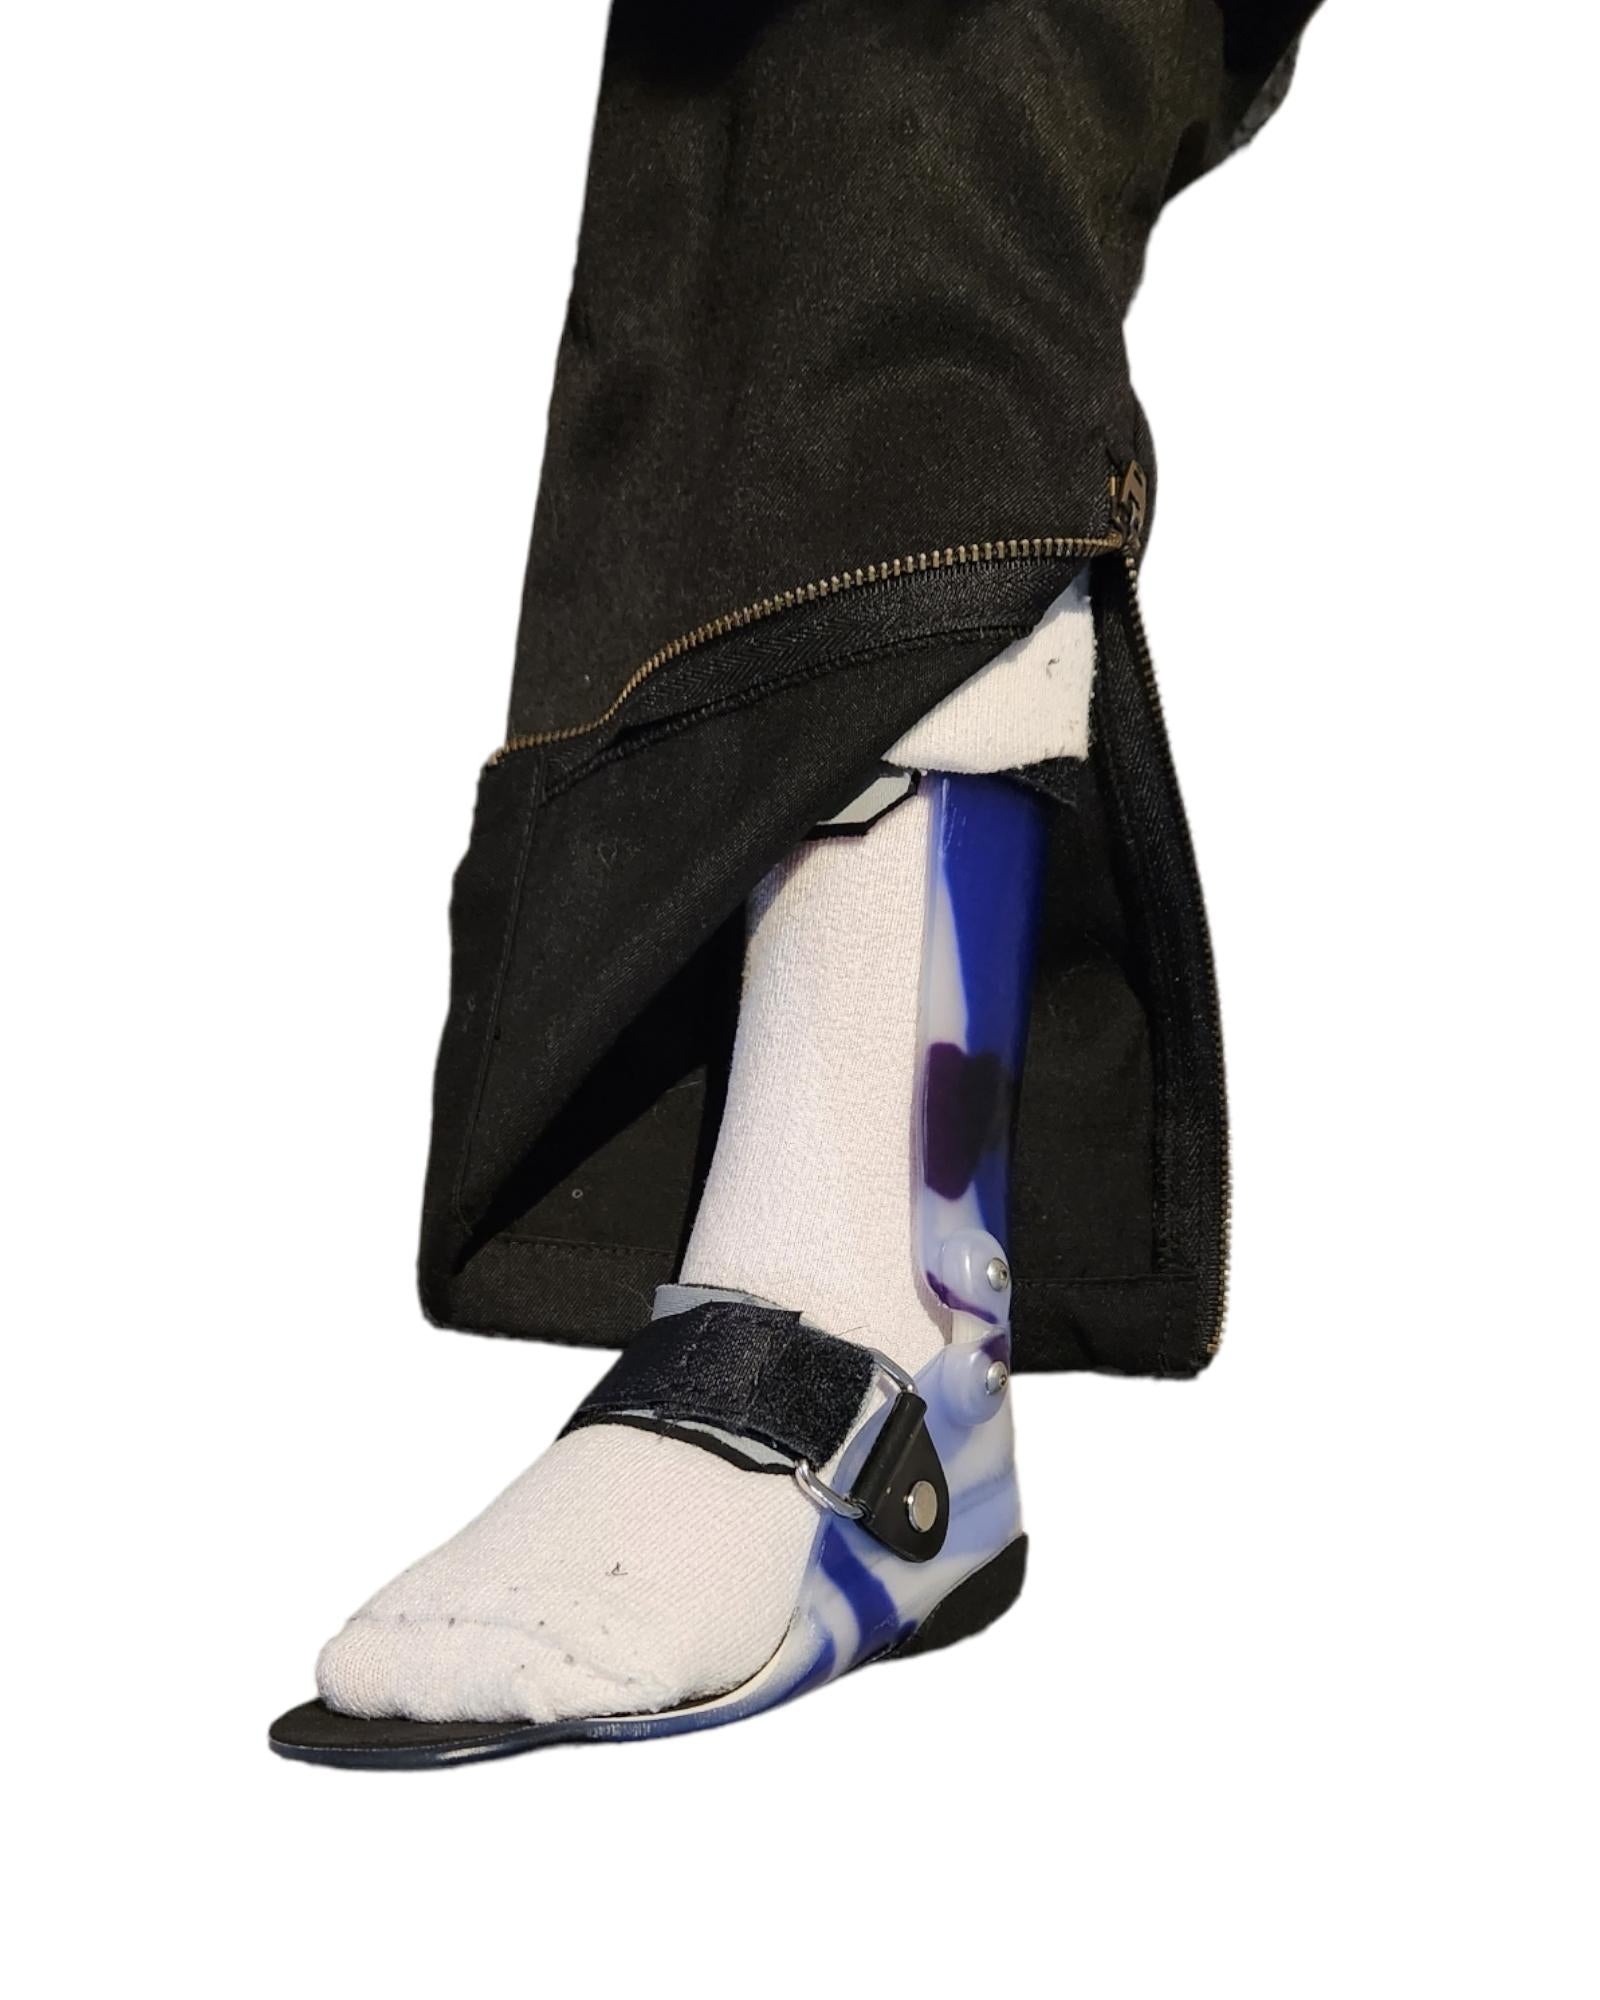 Lloyd style black cotton polyester trouser with metal zip at ankle, showing white sock and blue ankle foot orthotic AFO